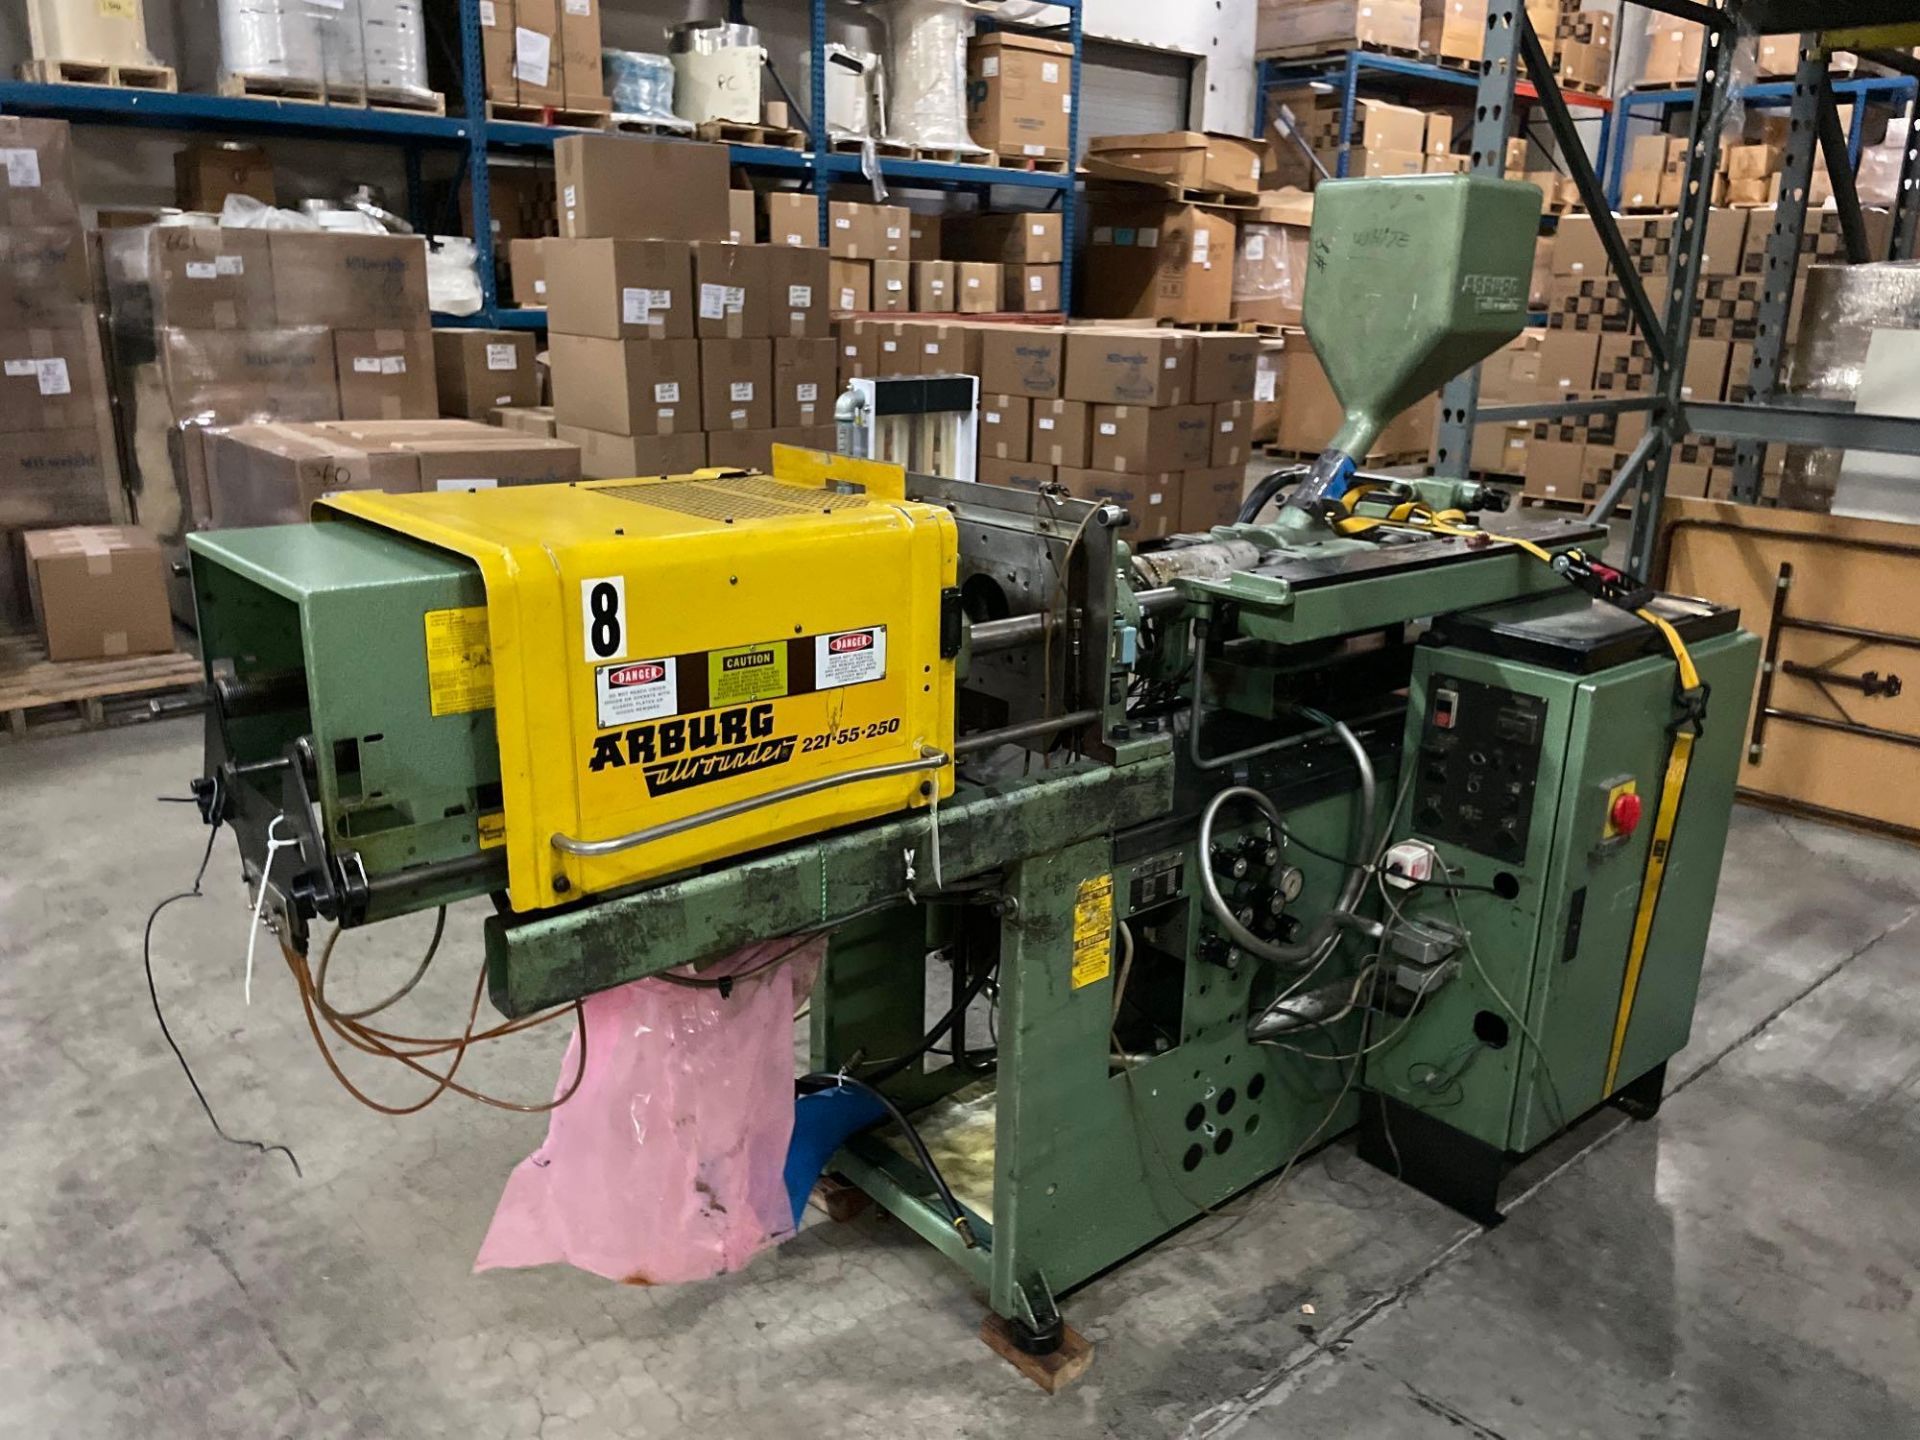 Arburg Allrounder 221-55-250 Plastic Injection Molding Machine *PARTS ONLY* - Image 3 of 5